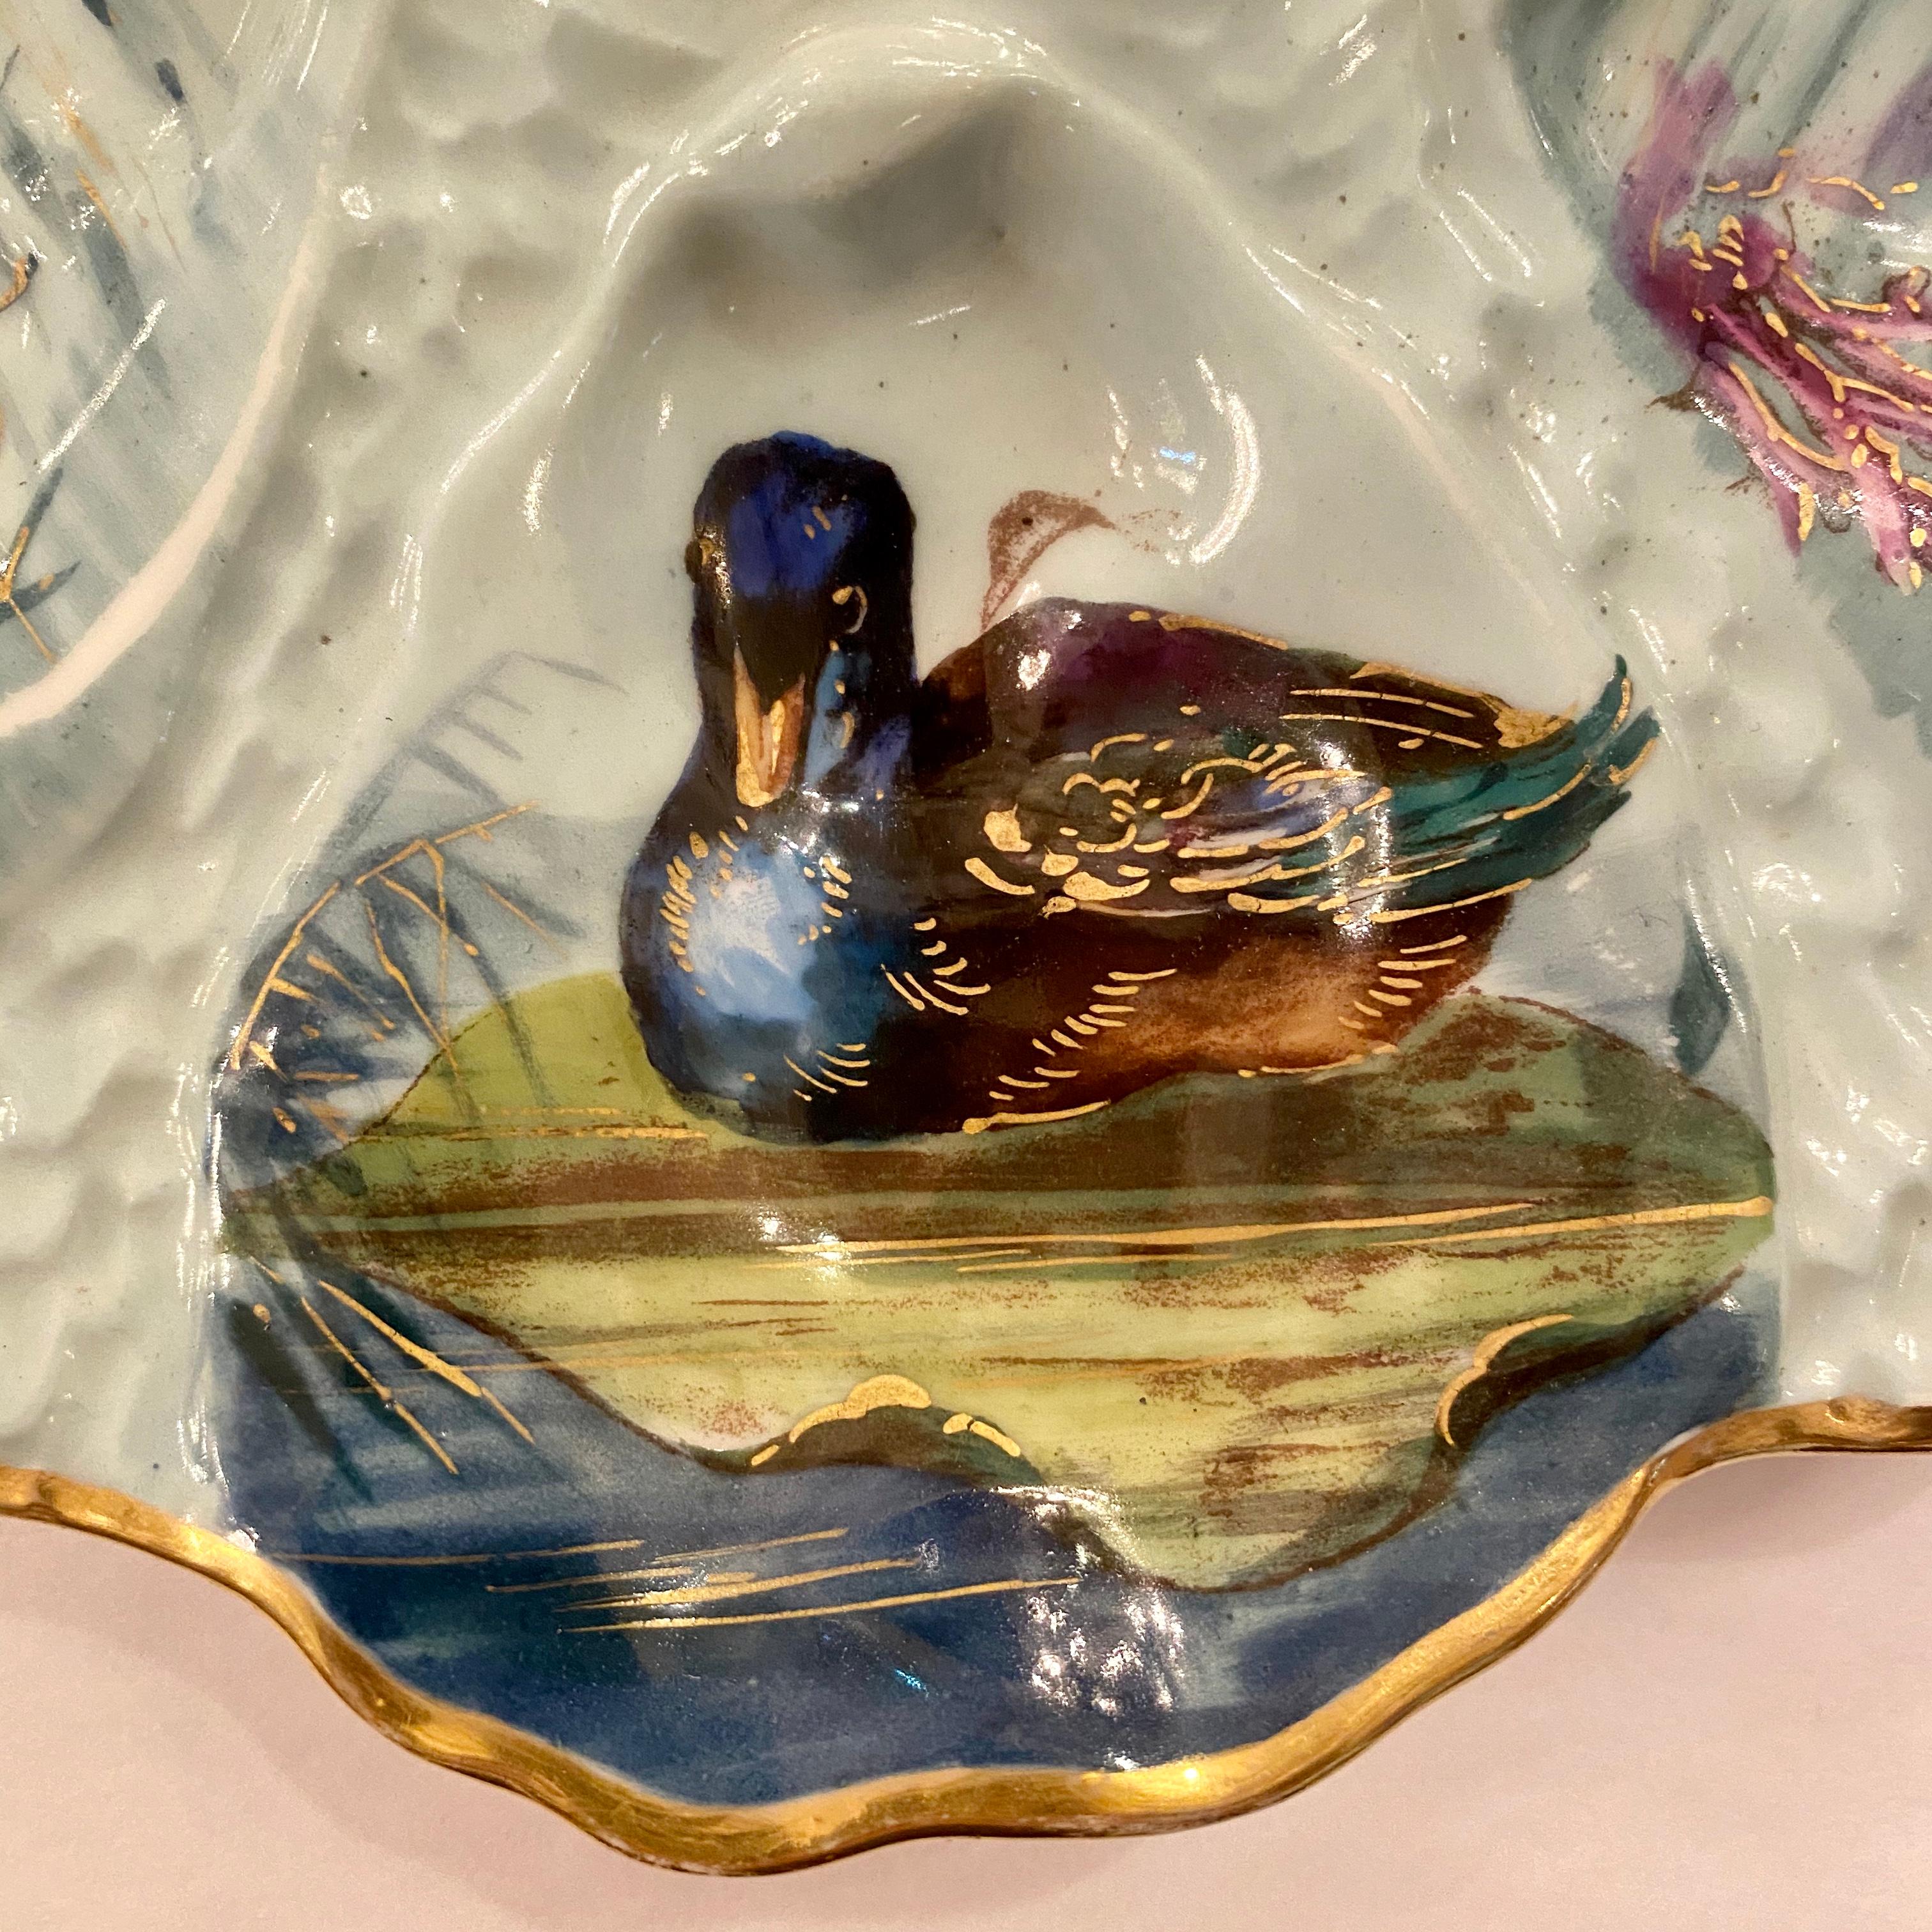 Antique French Limoges porcelain oyster plate with hand painted sea life, circa 1870-1880.
We currently have a coordinating pair of these, each listed and sold individually.